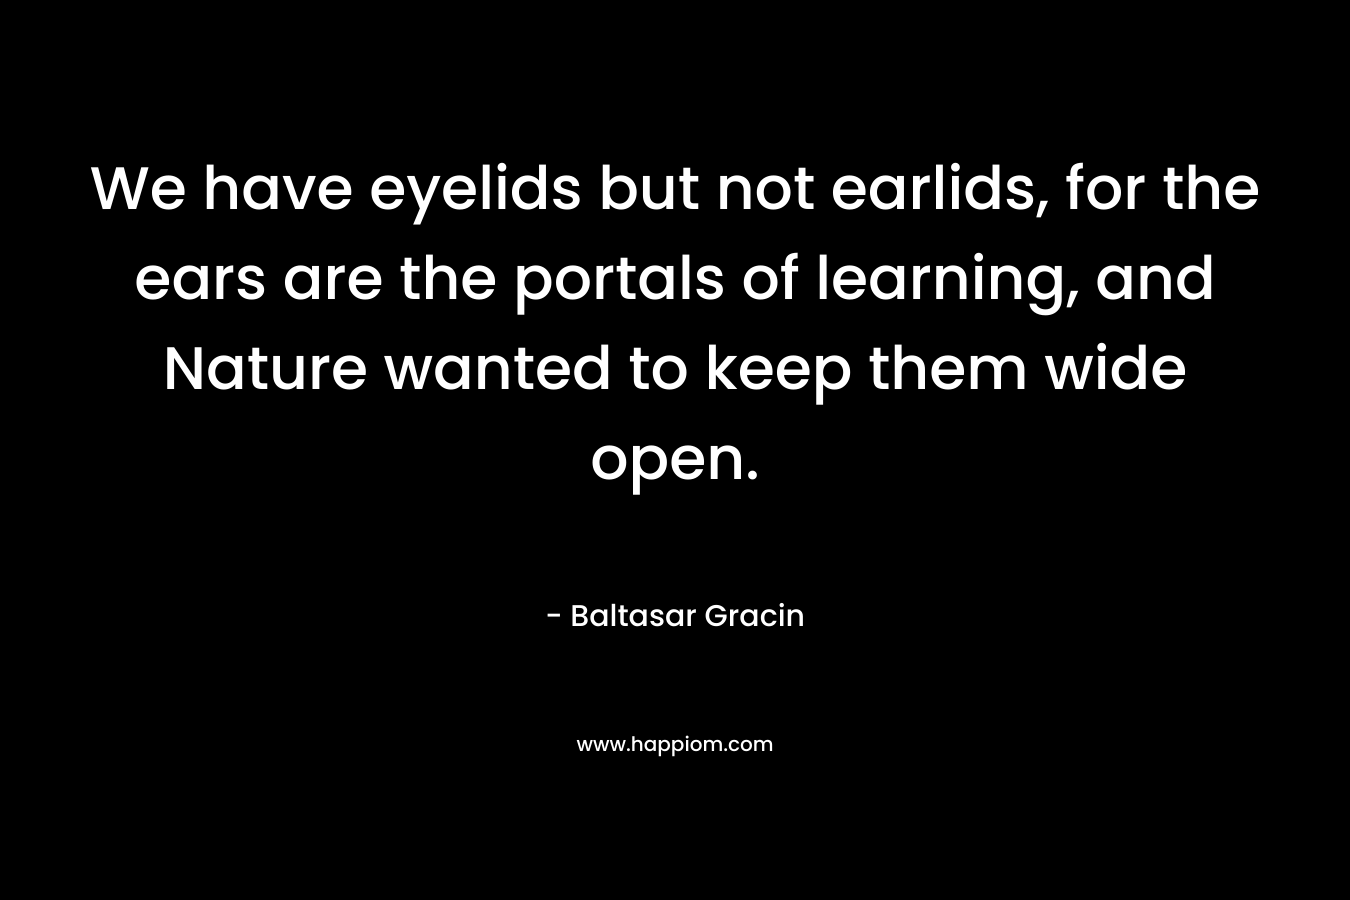 We have eyelids but not earlids, for the ears are the portals of learning, and Nature wanted to keep them wide open. – Baltasar Gracin